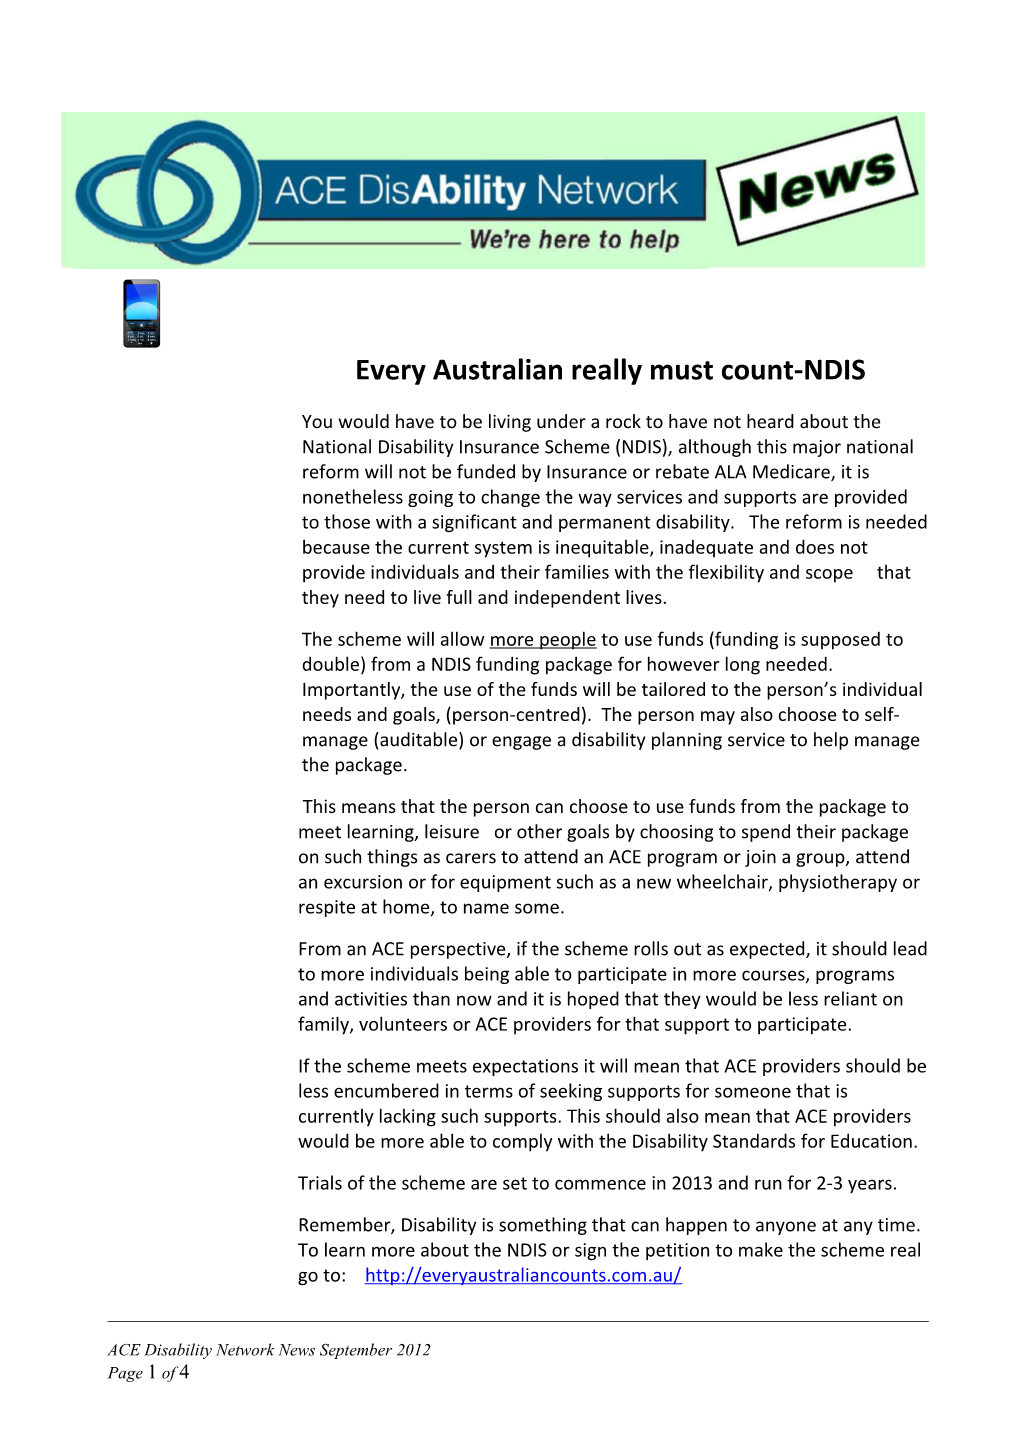 Every Australian Really Must Count-NDIS